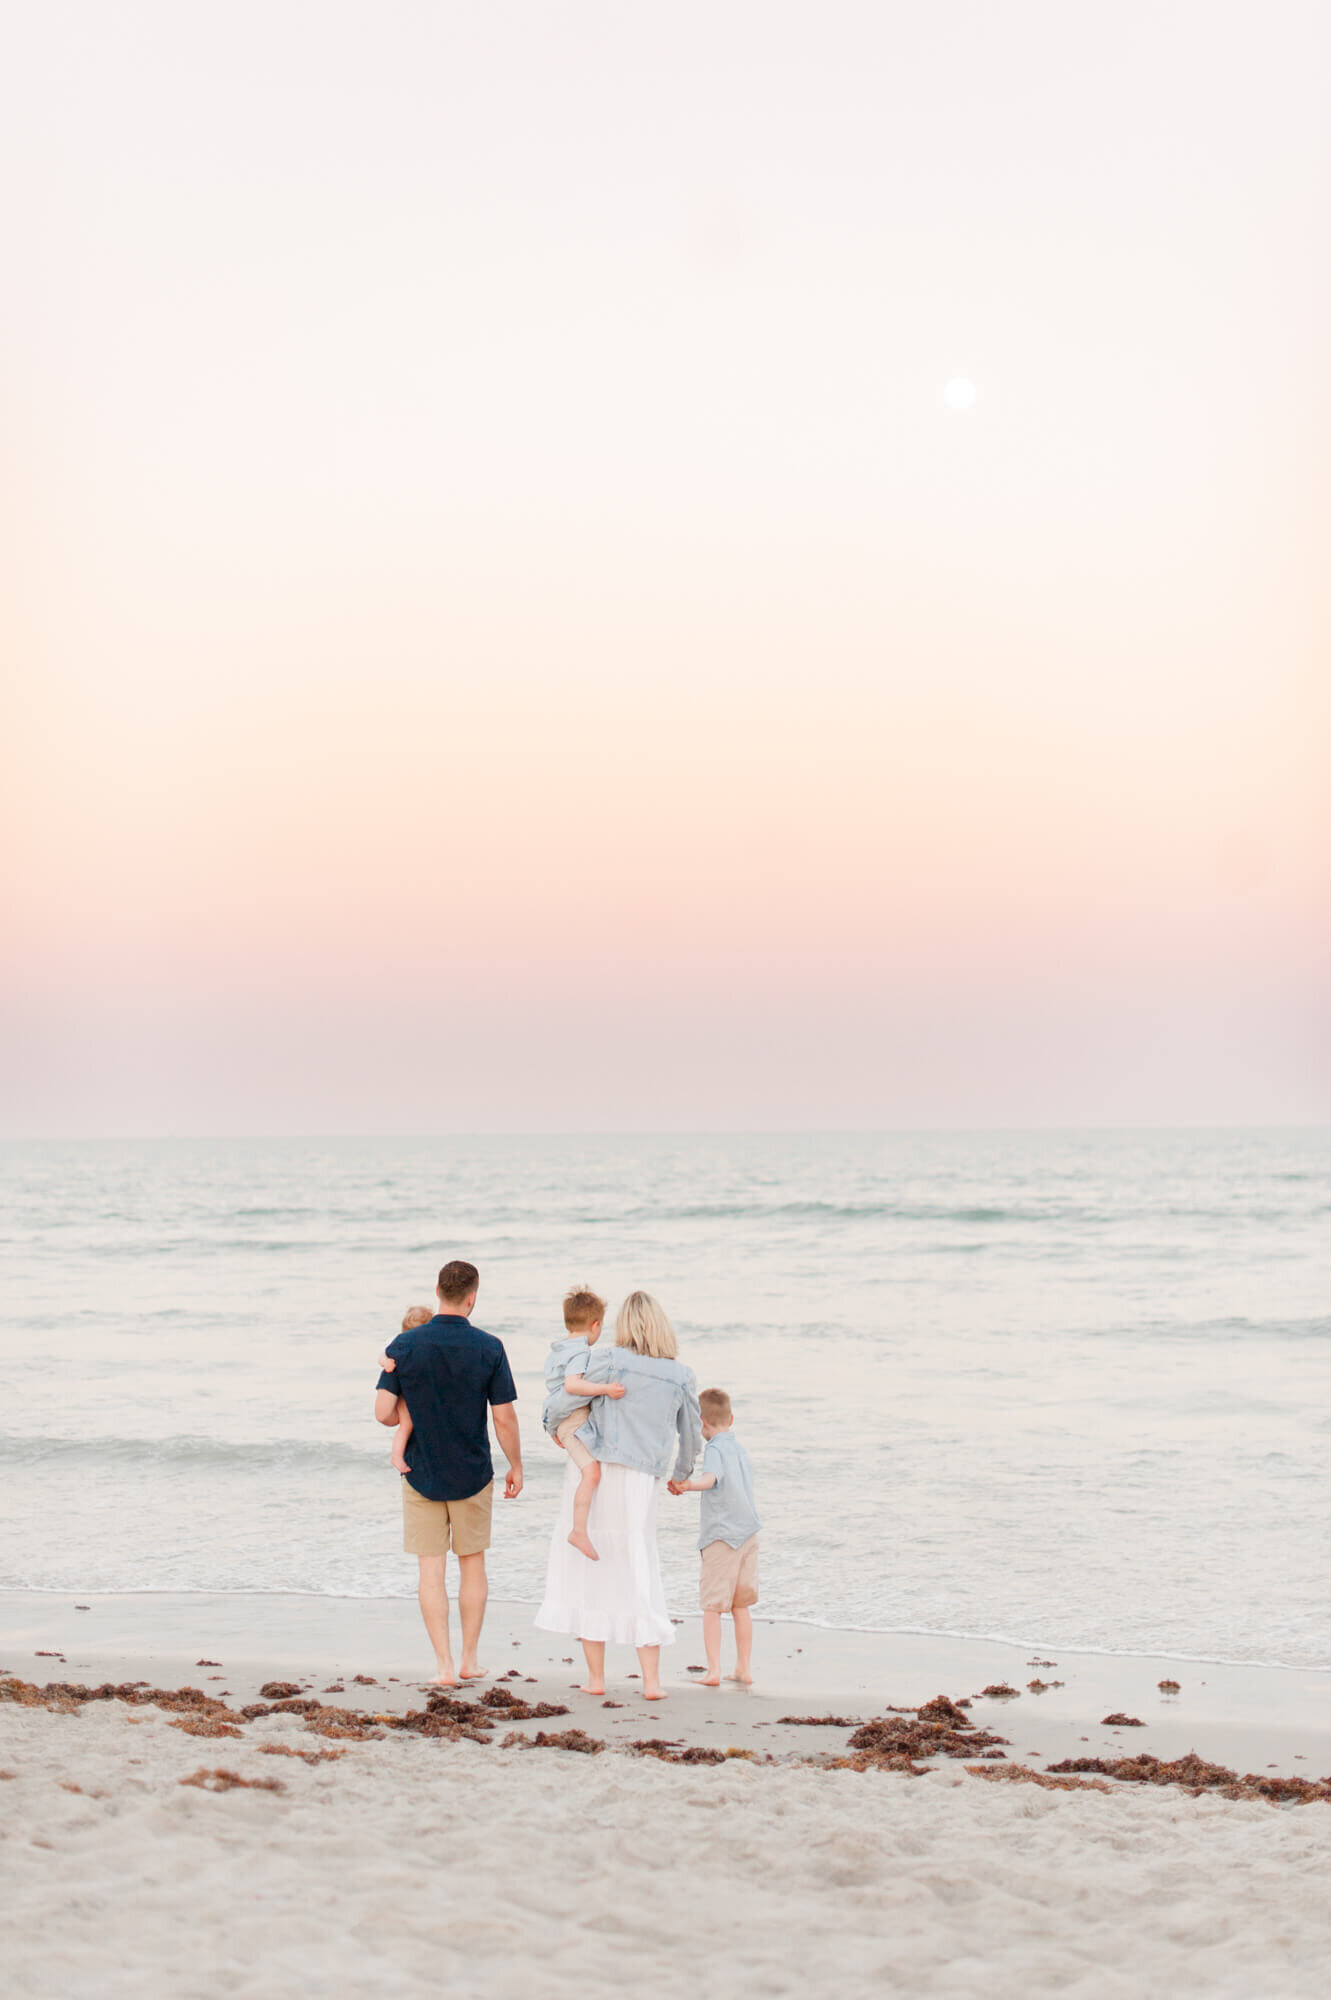 Family stands near the shoreline looking at the moon and watching the waves crash.